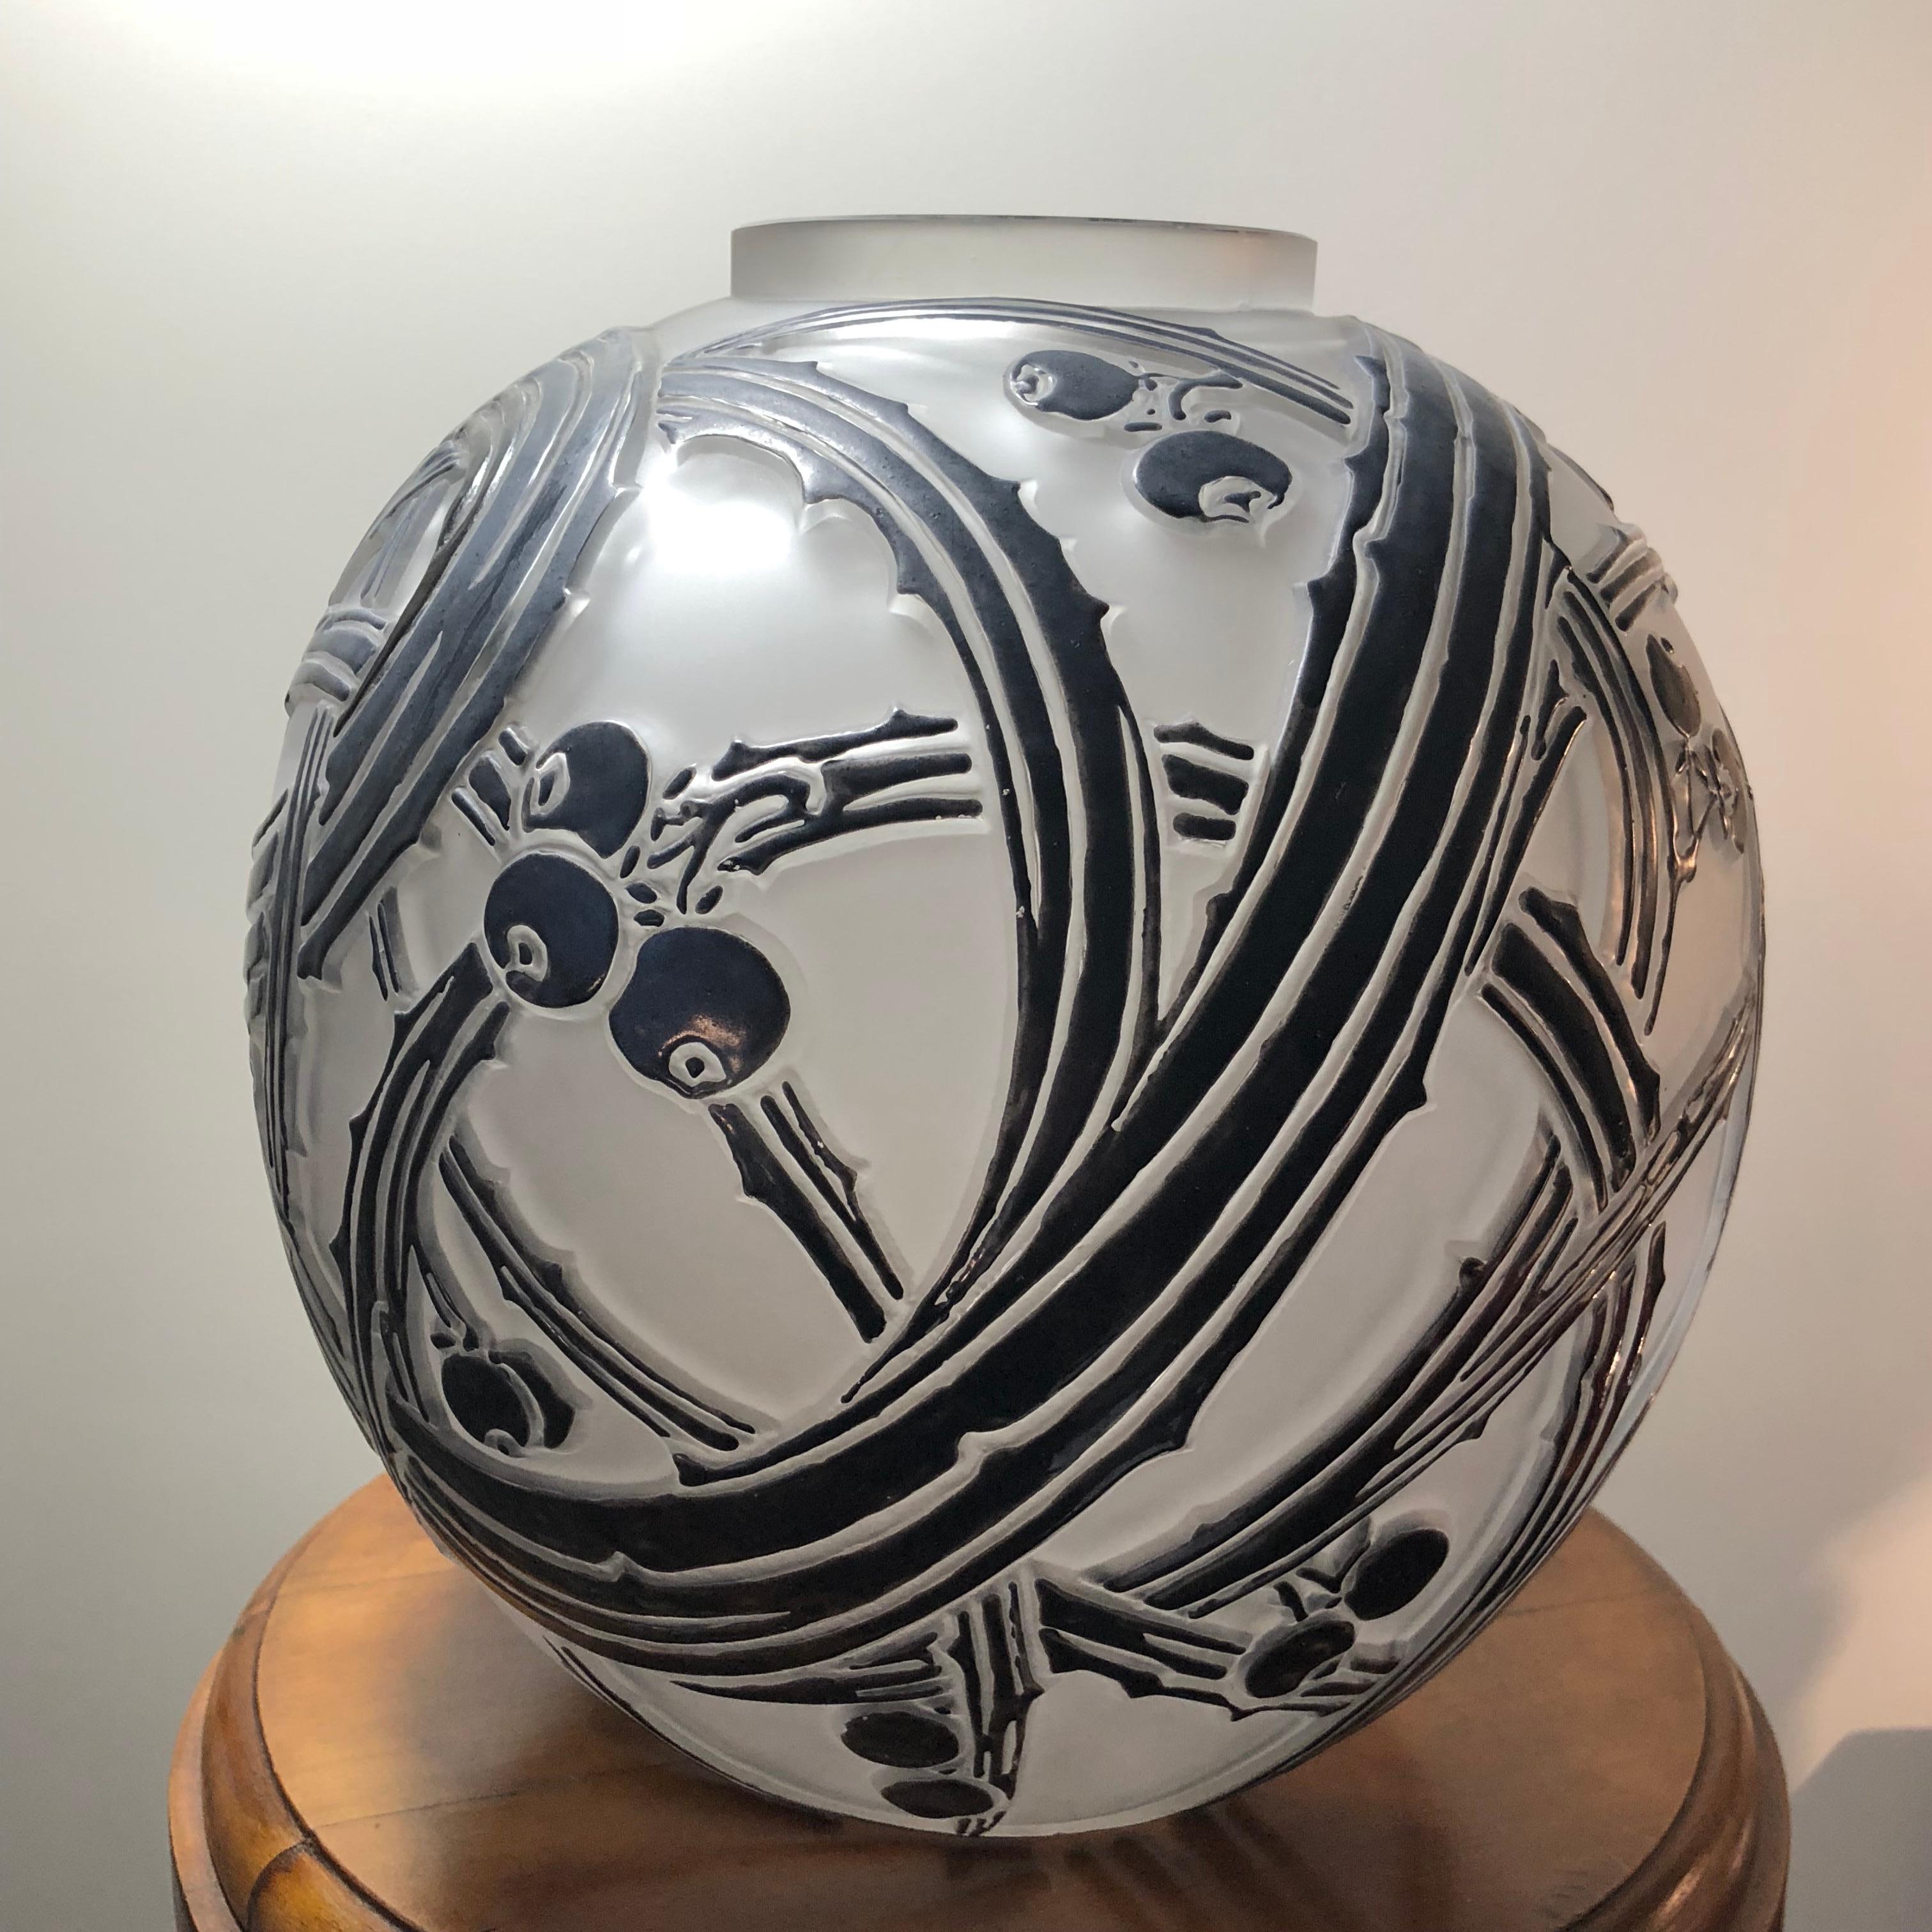 Molded 1924 Rene Lalique Baies Vase in Frosted Glass with Shinny Original Black Enamel